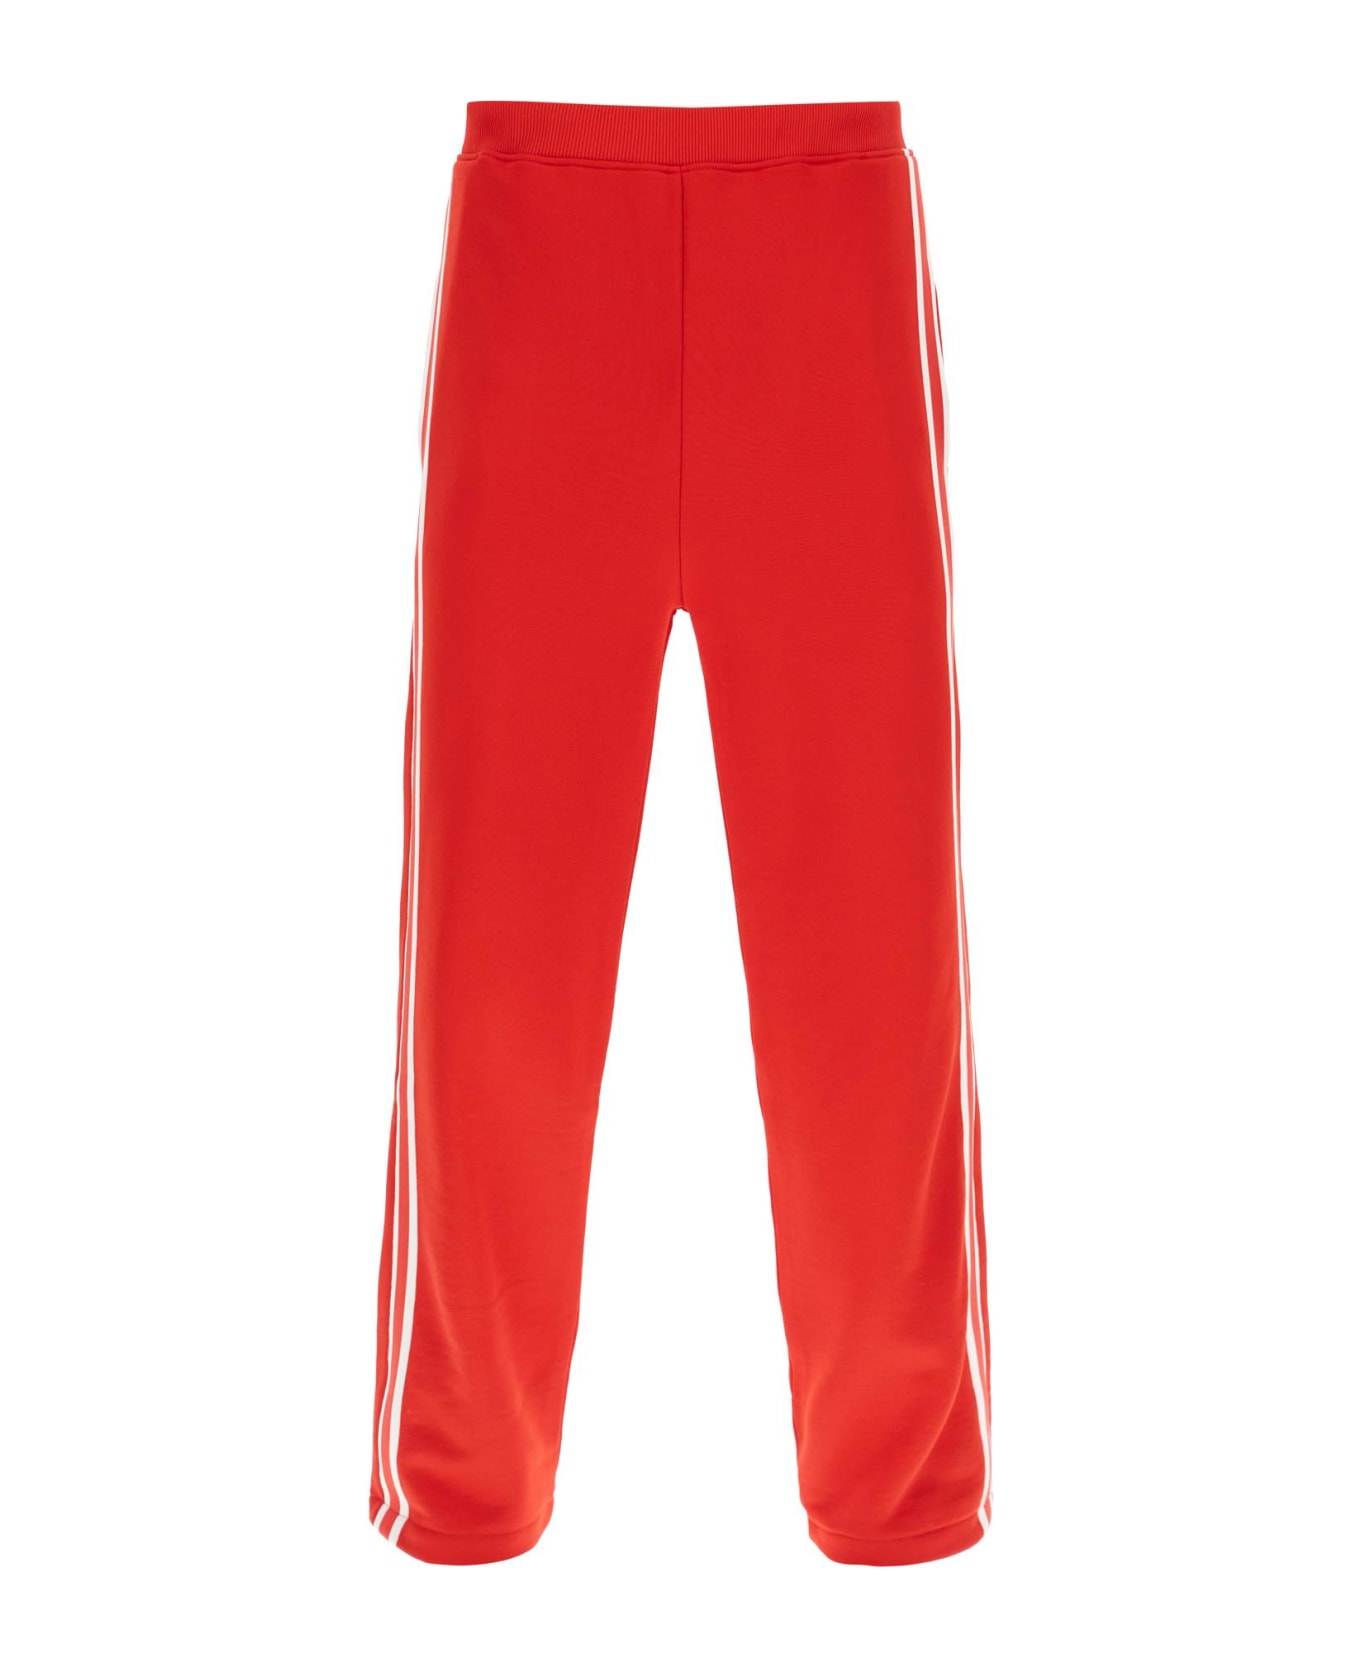 Ami Alexandre Mattiussi Track Pants With Side Bands - SCARLET RED (Red)